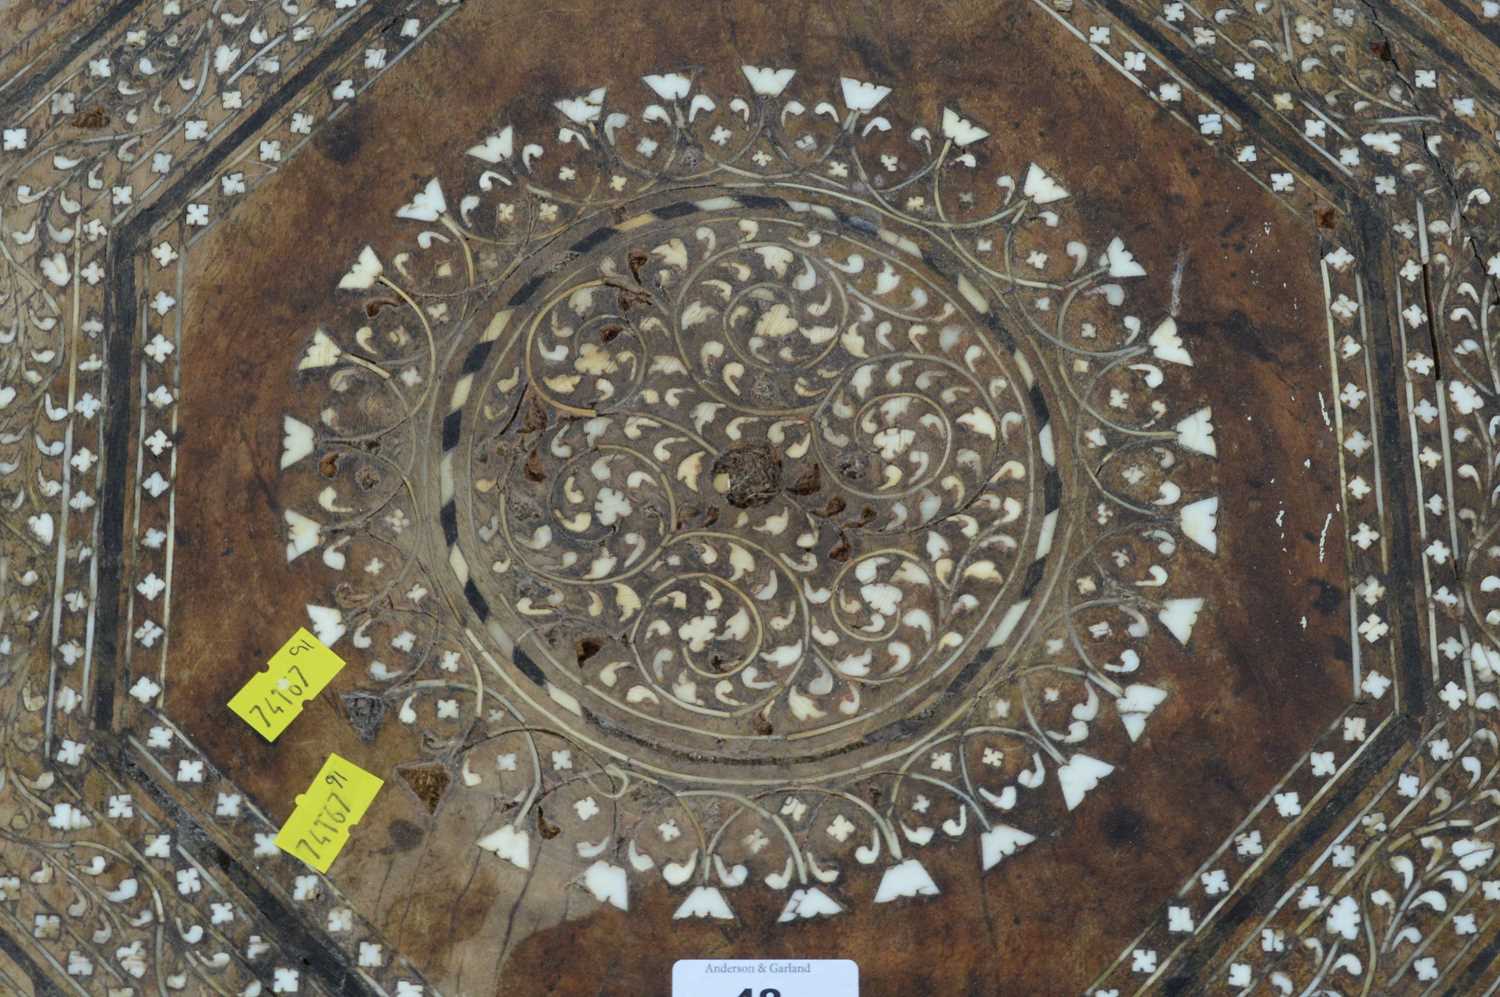 A Middle Eastern Islamic folding hexagonal occasional table - Image 2 of 2